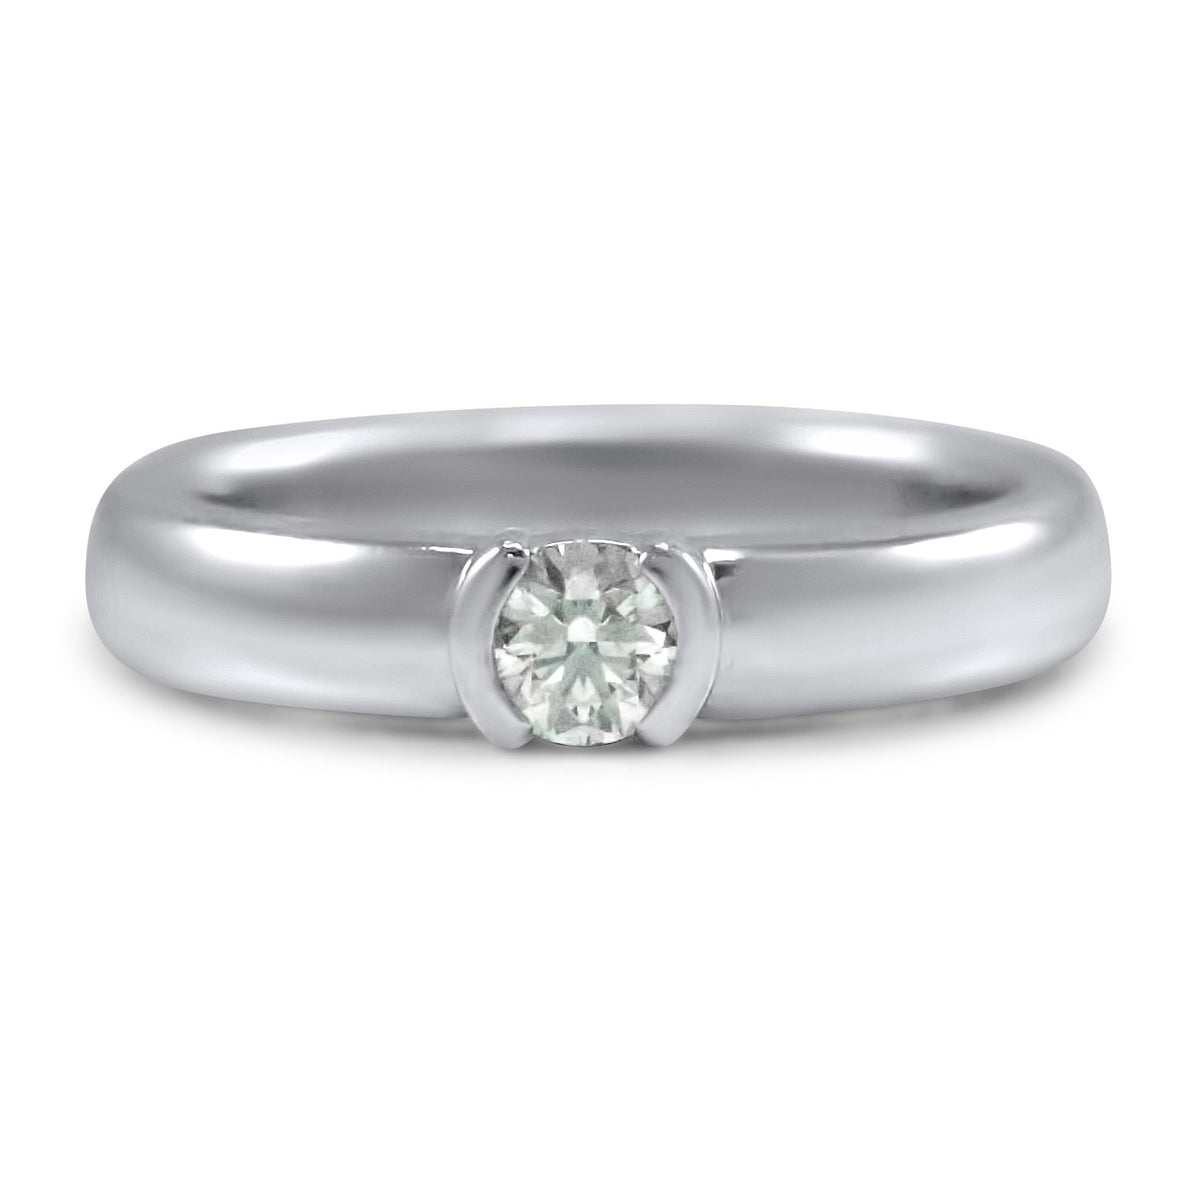 vintage tiffany and co engagement ring diamond center stone in a platinum setting